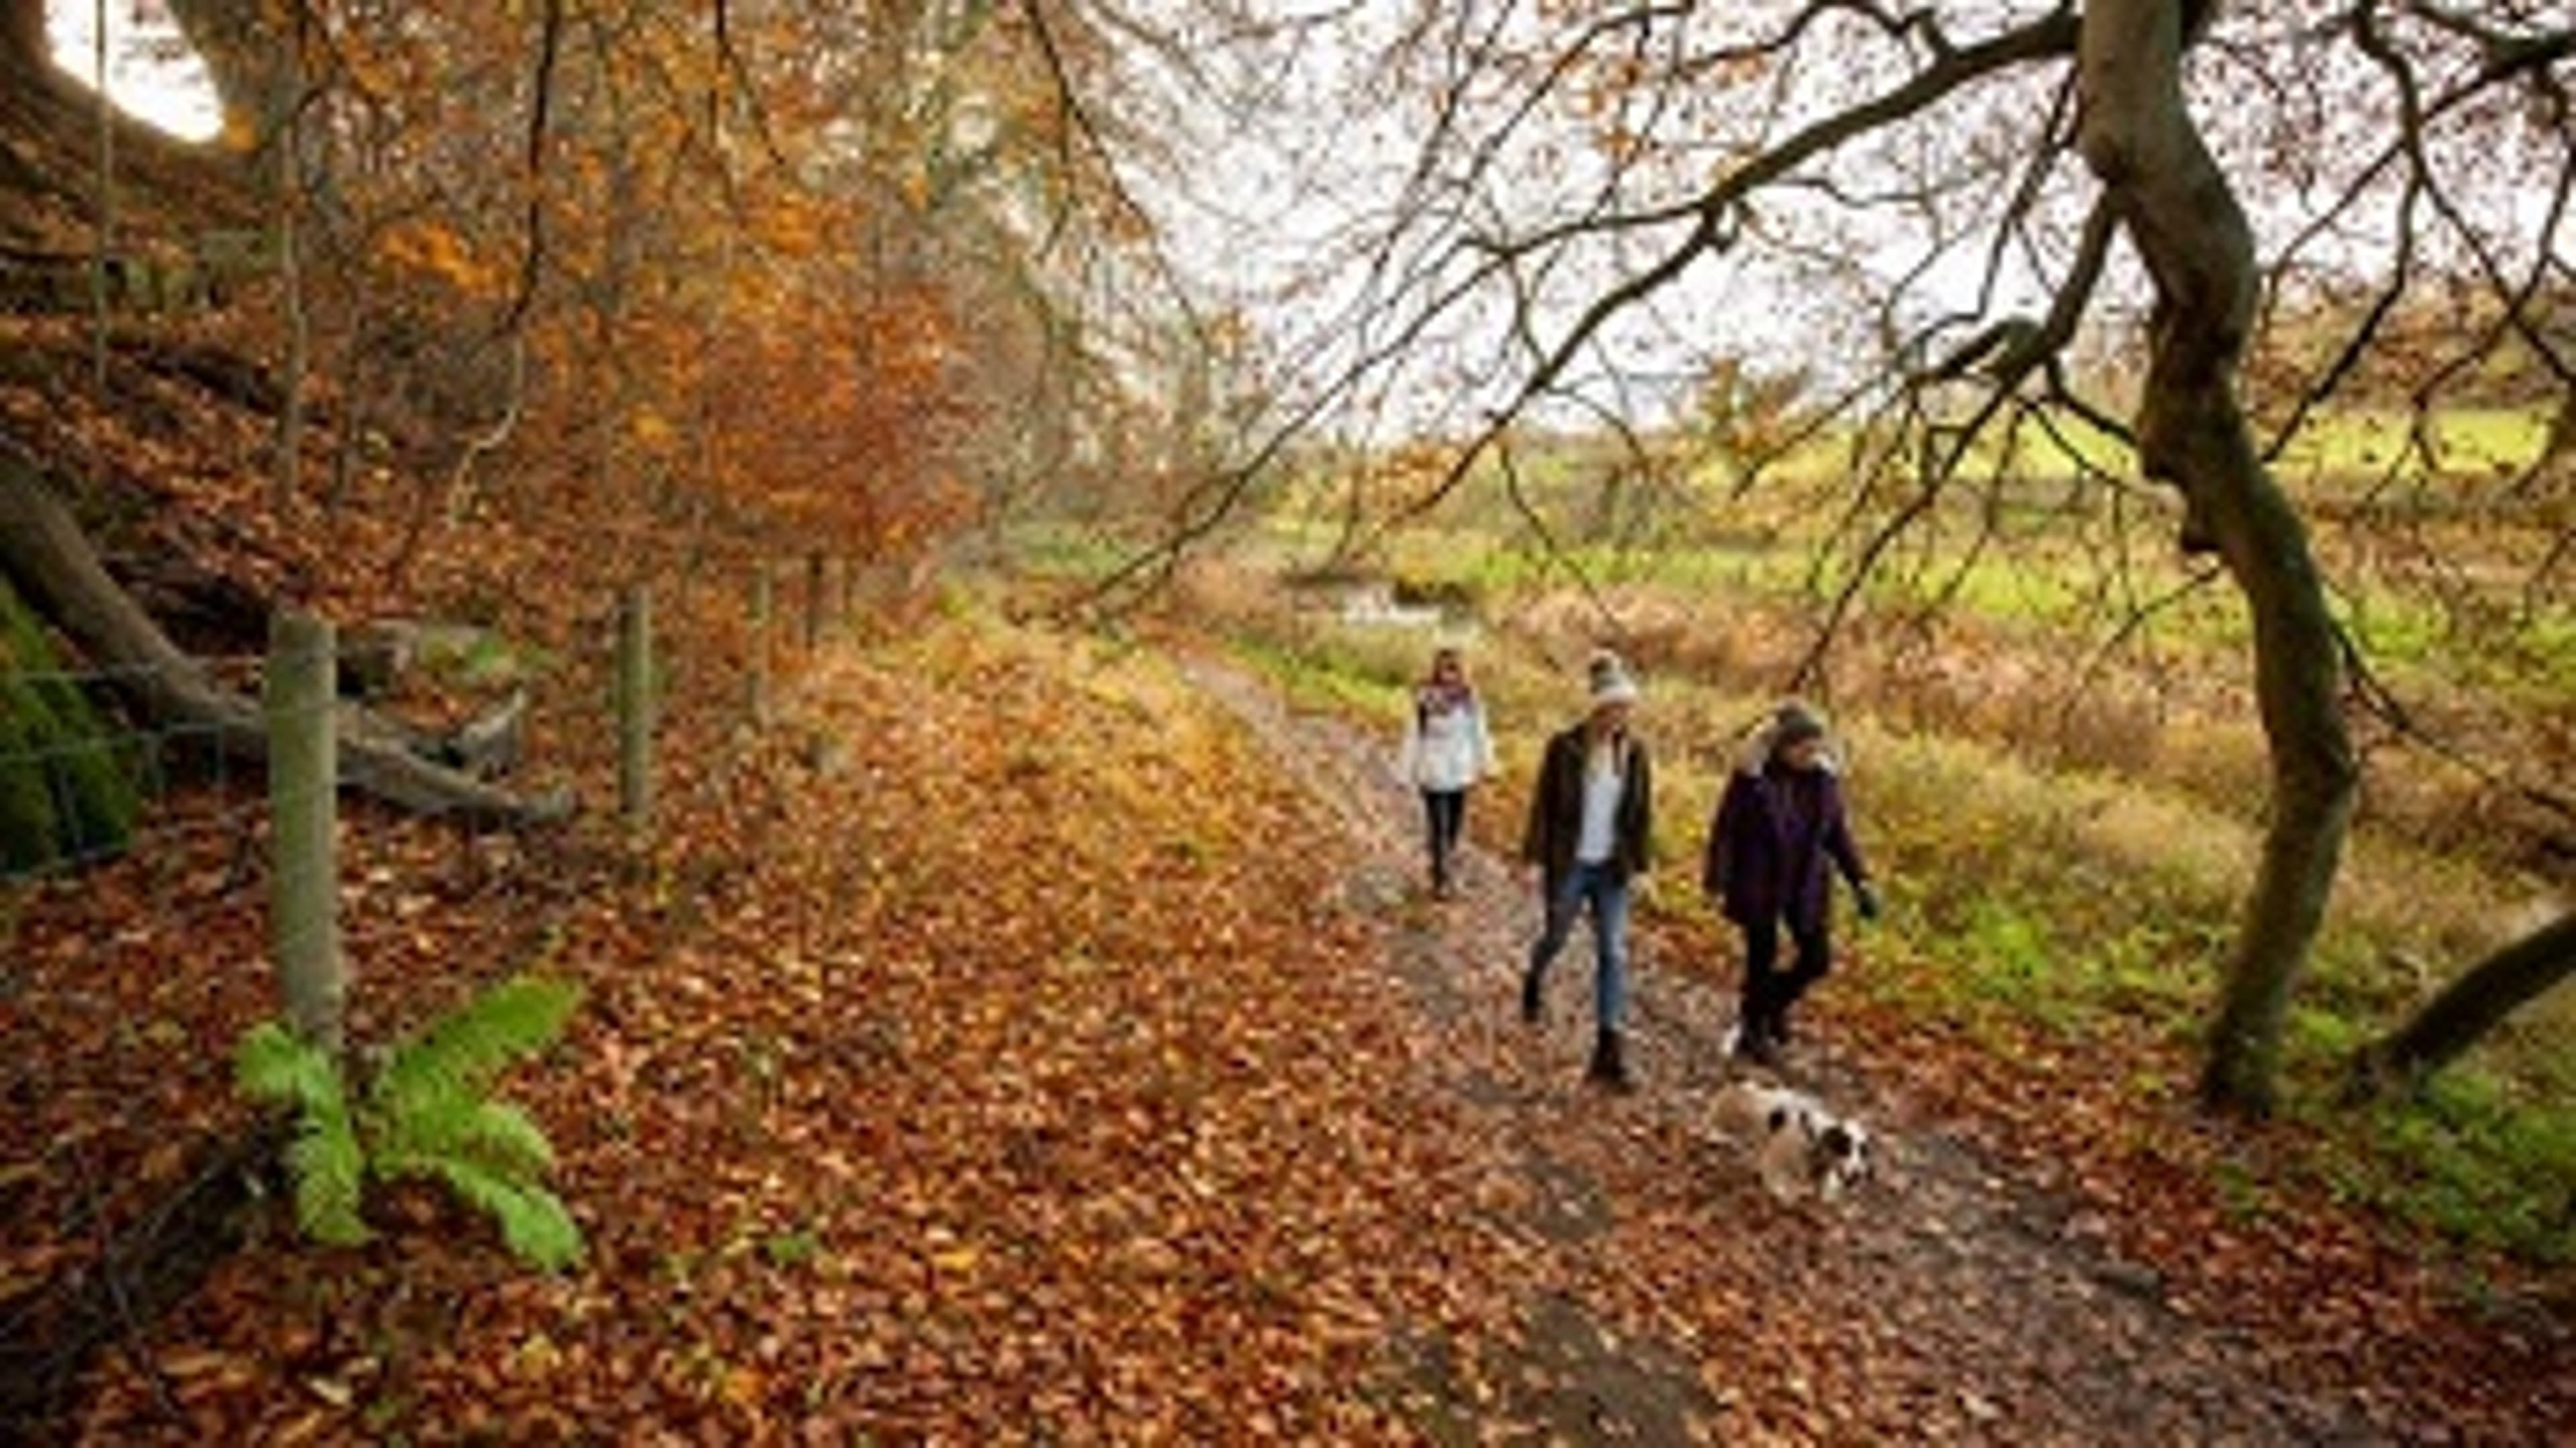  A Family Walking in a National Trust Area 